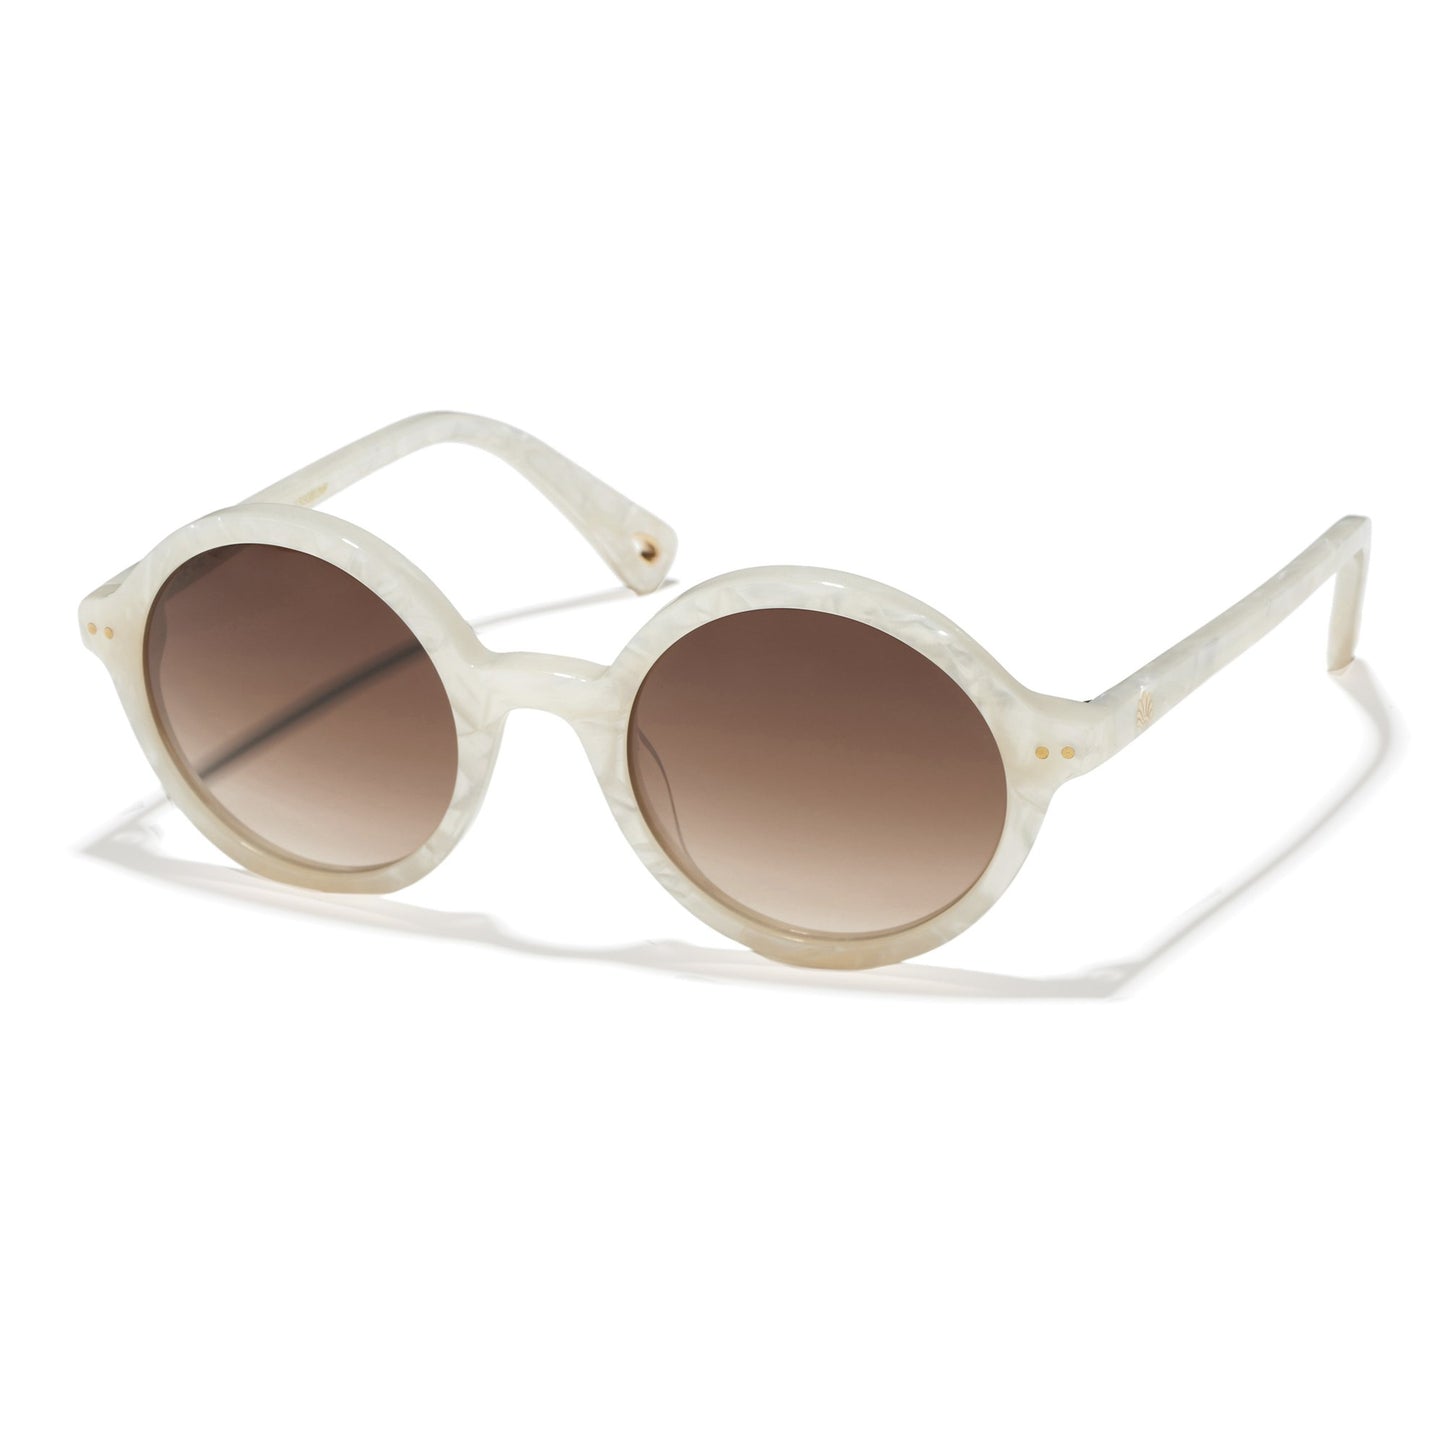 Sunglasses- East Village Round Mother of Pearl